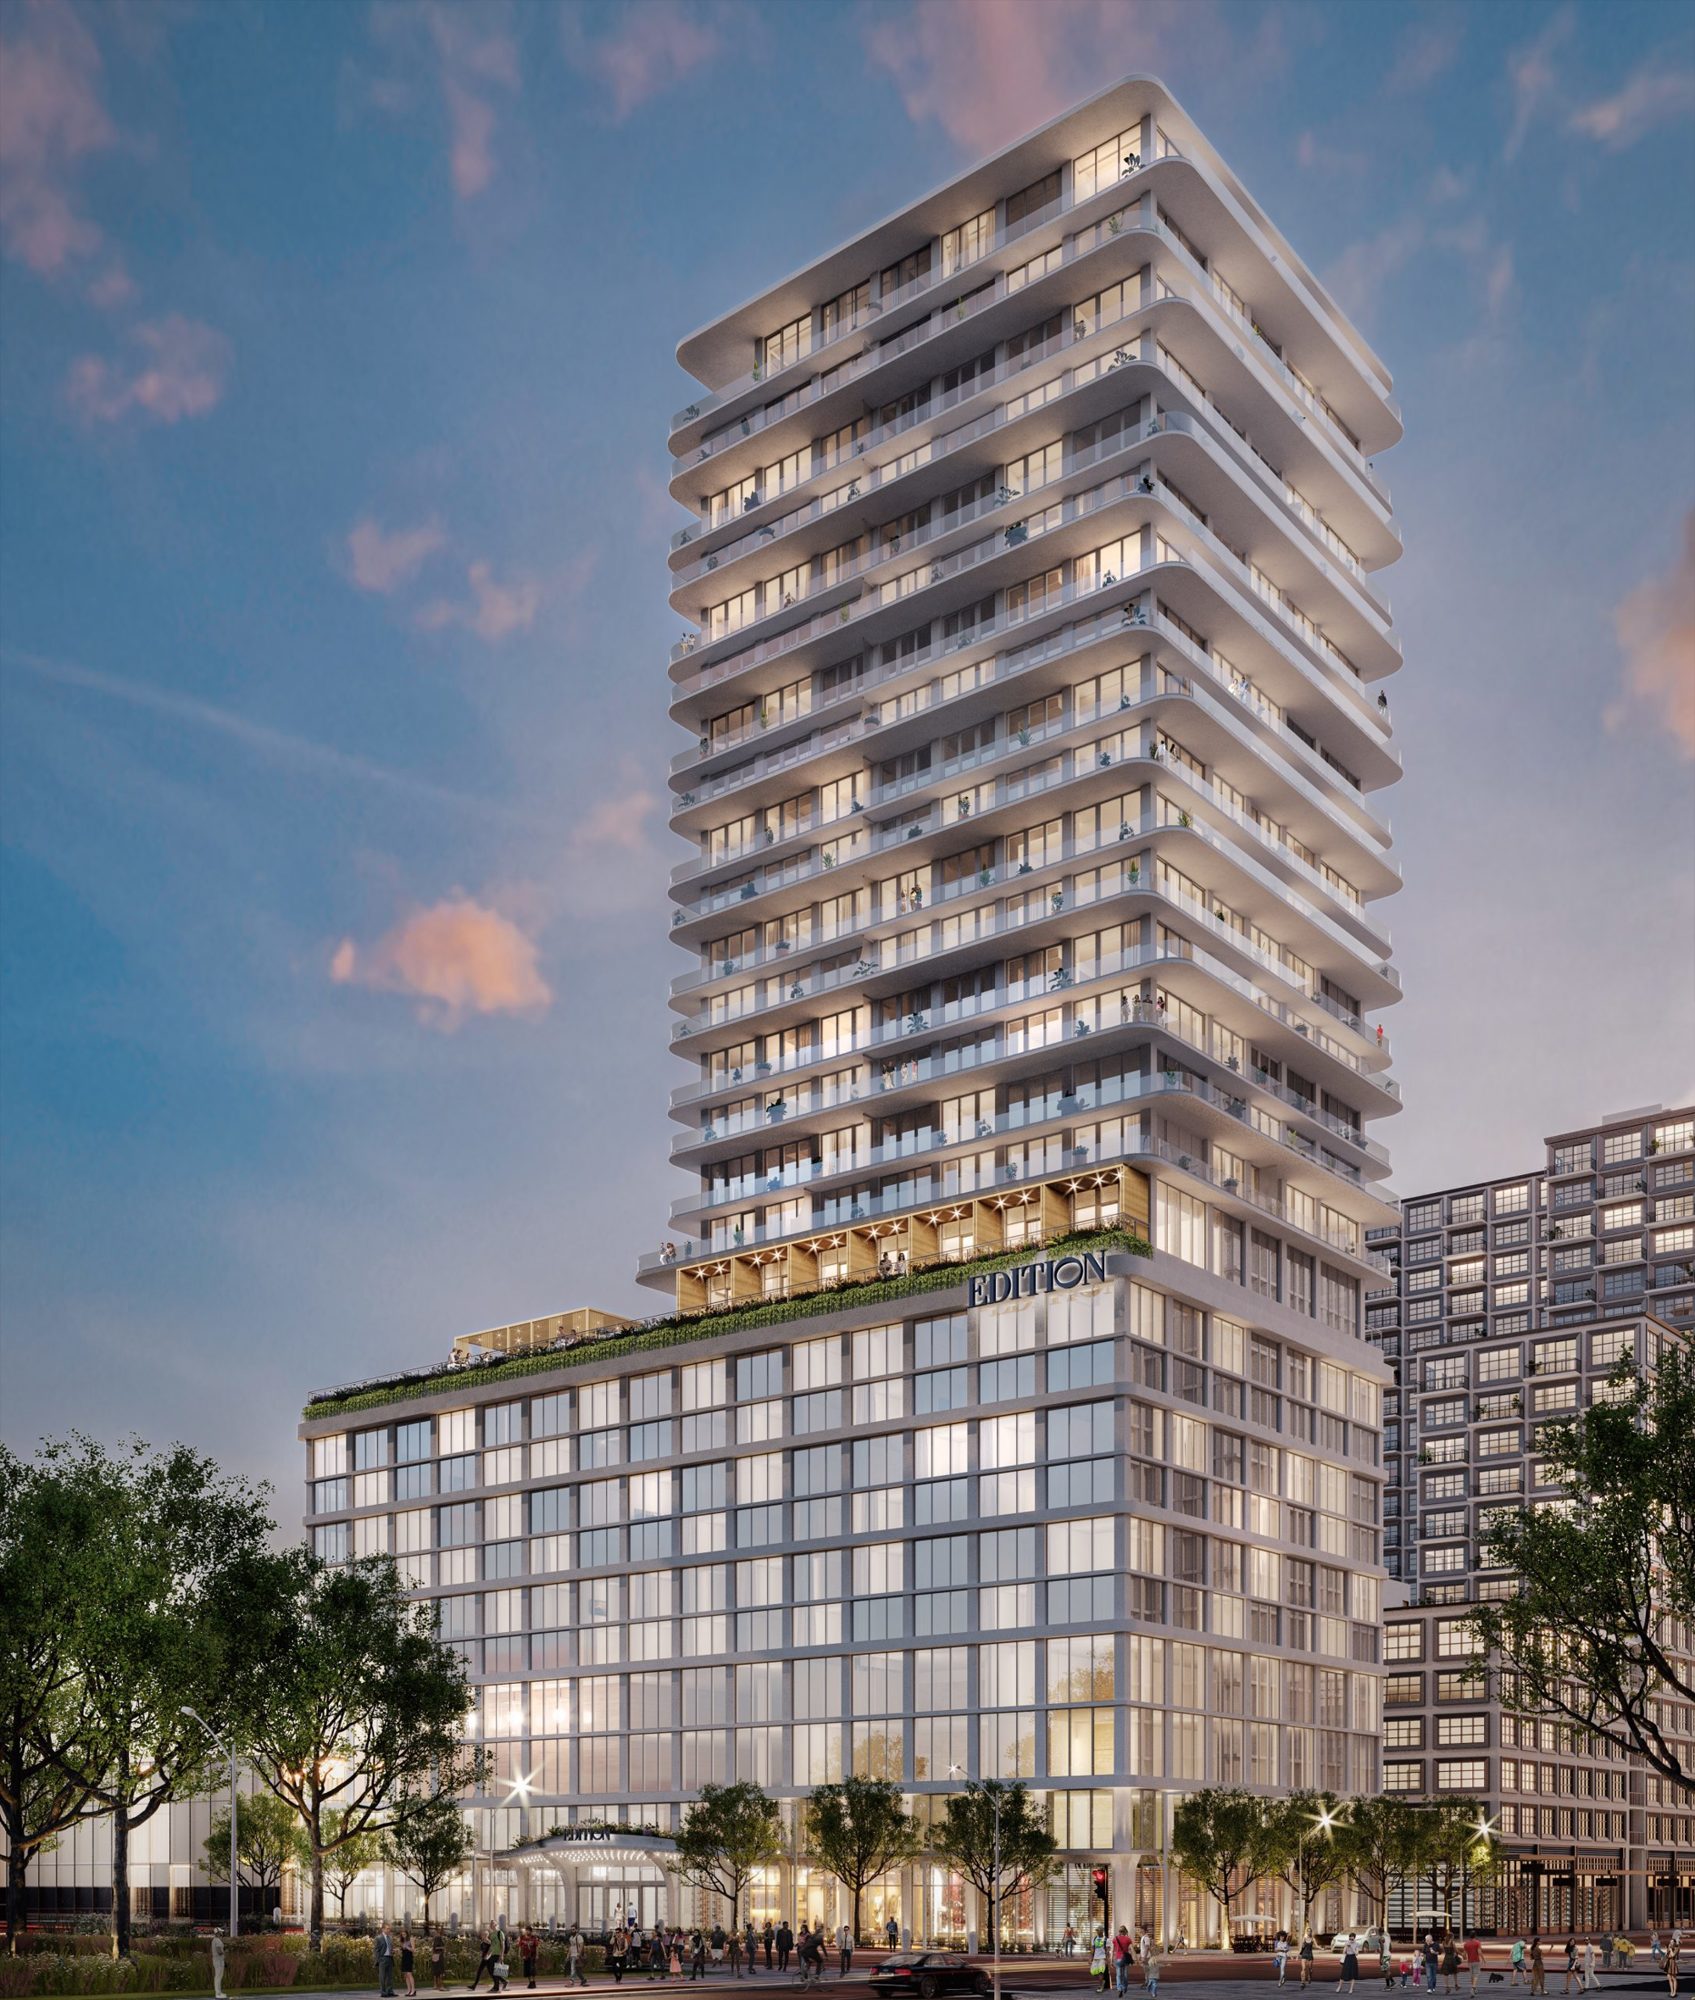 Suffolk is expected to complete the Tampa Edition Hotel & Residences, a 27-story condo and hotel tower that’s part of Strategic Property Partners’ $3 billion Water Street Tampa, in 2021.